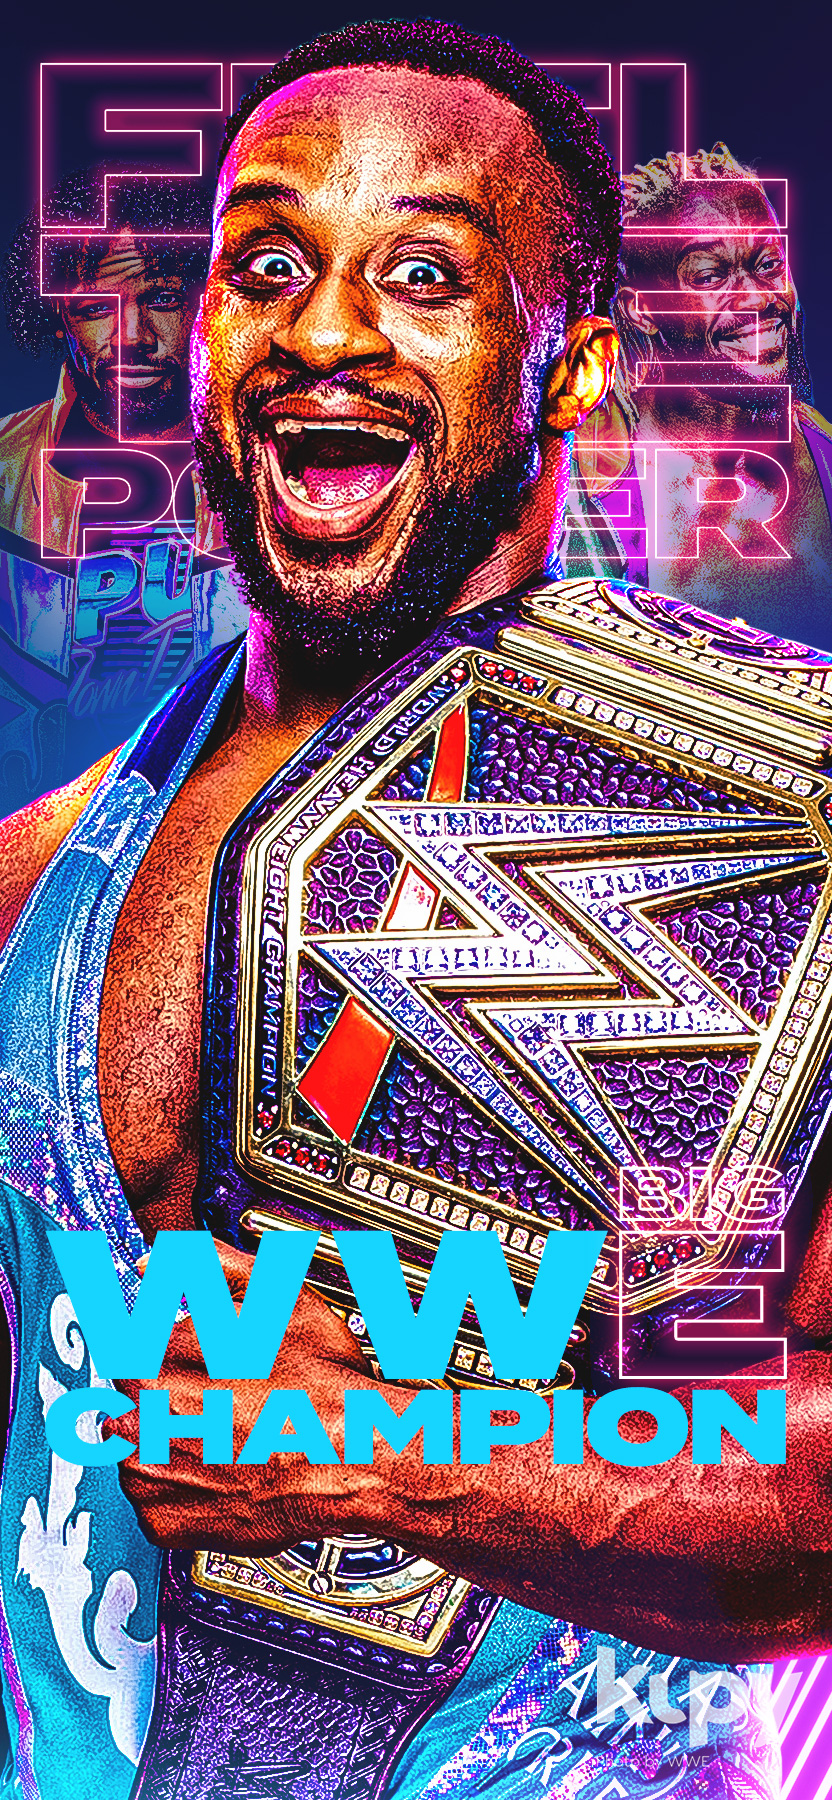 Kupy Wrestling Wallpapers The Latest Source For Your Wwe Wrestling Wallpaper Needs Mobile Hd And 4k Resolutions Available